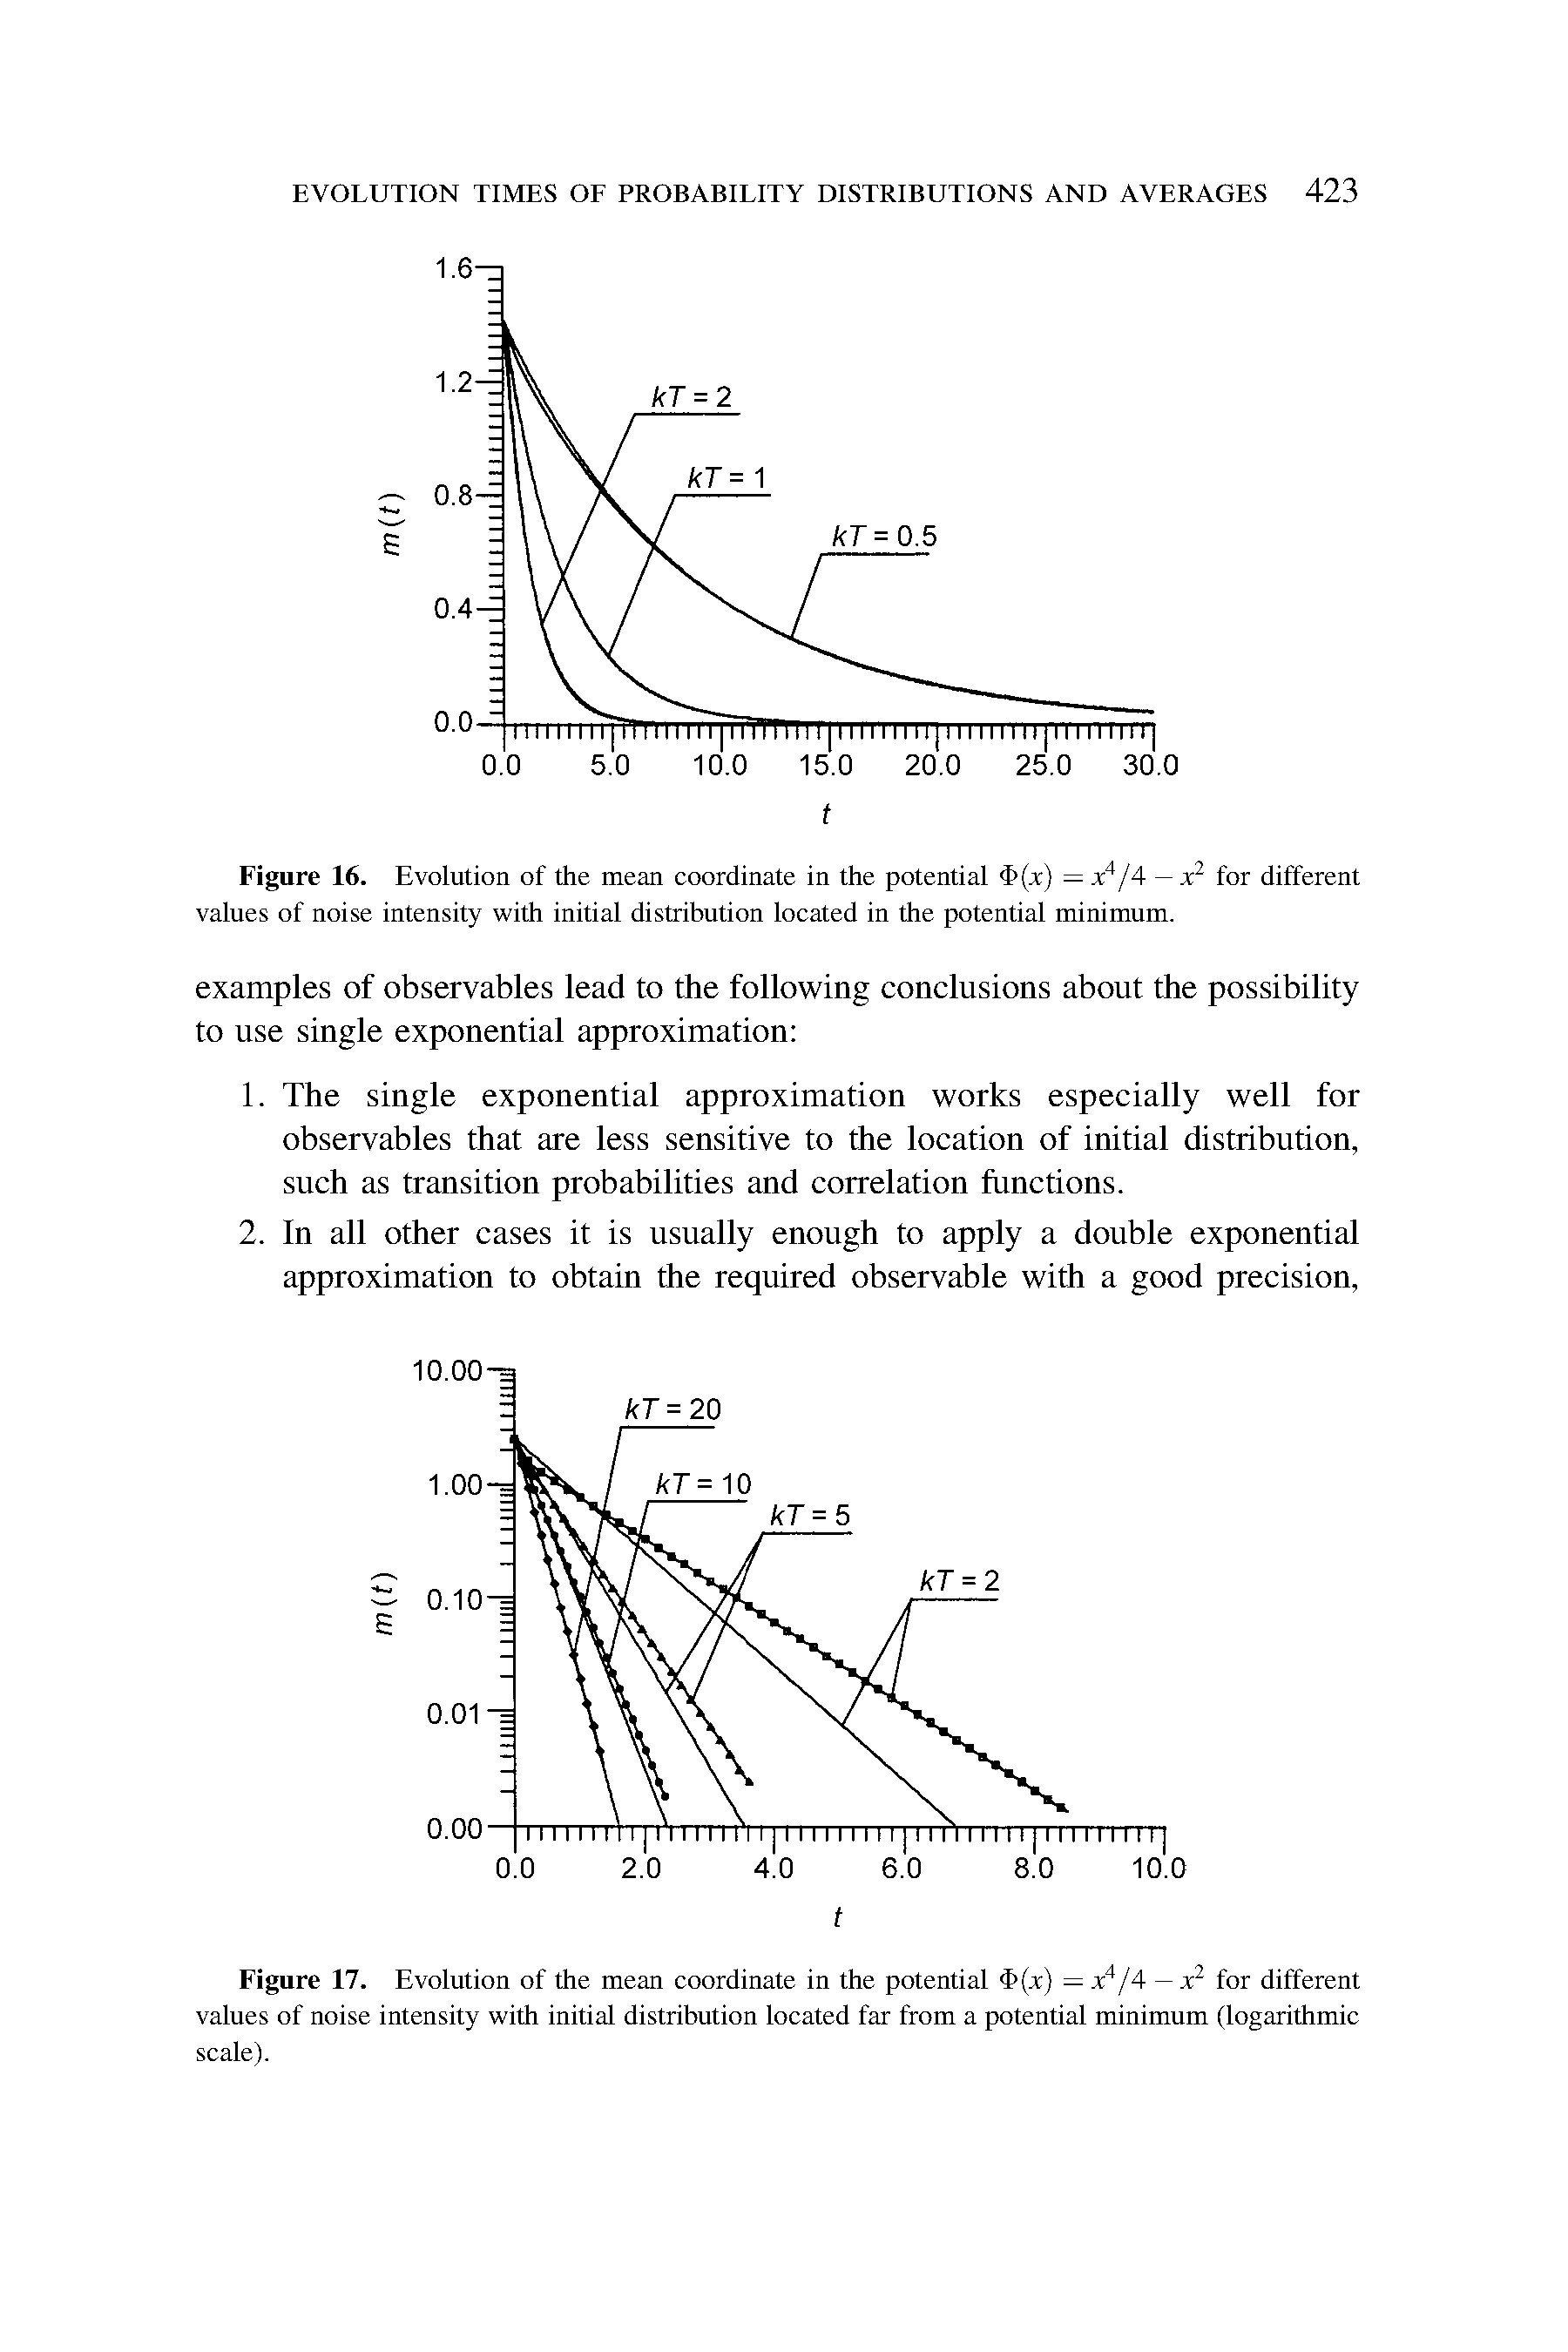 Figure 16. Evolution of the mean coordinate in the potential <f>(x) — x4 f 4 — x2 for different values of noise intensity with initial distribution located in the potential minimum.